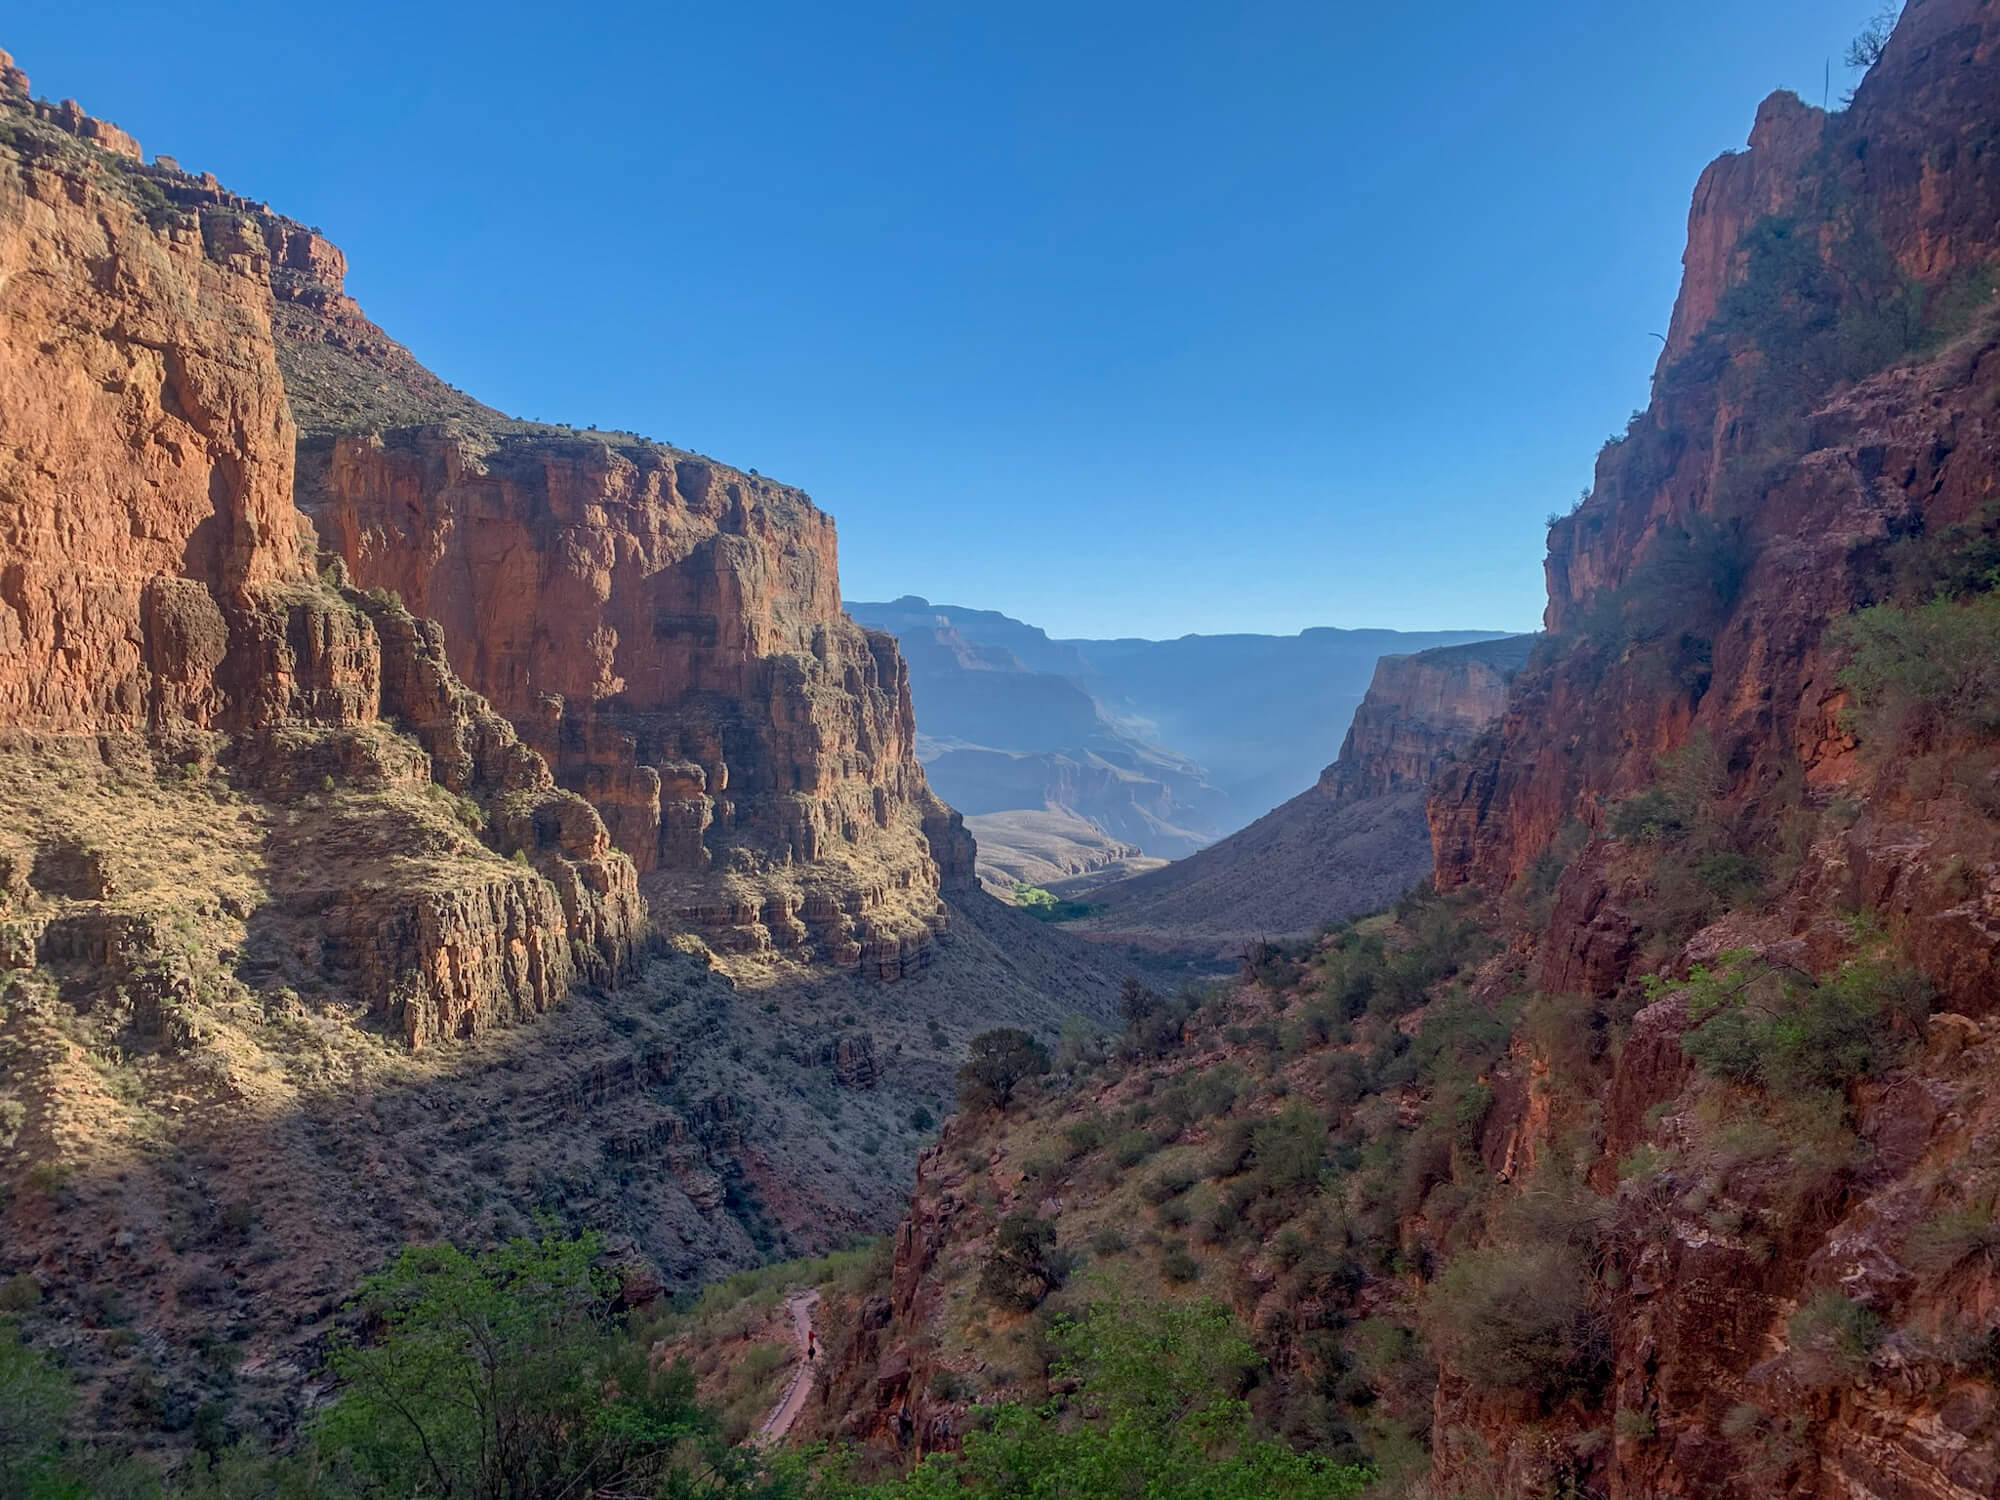 View from the Bright Angel Trail